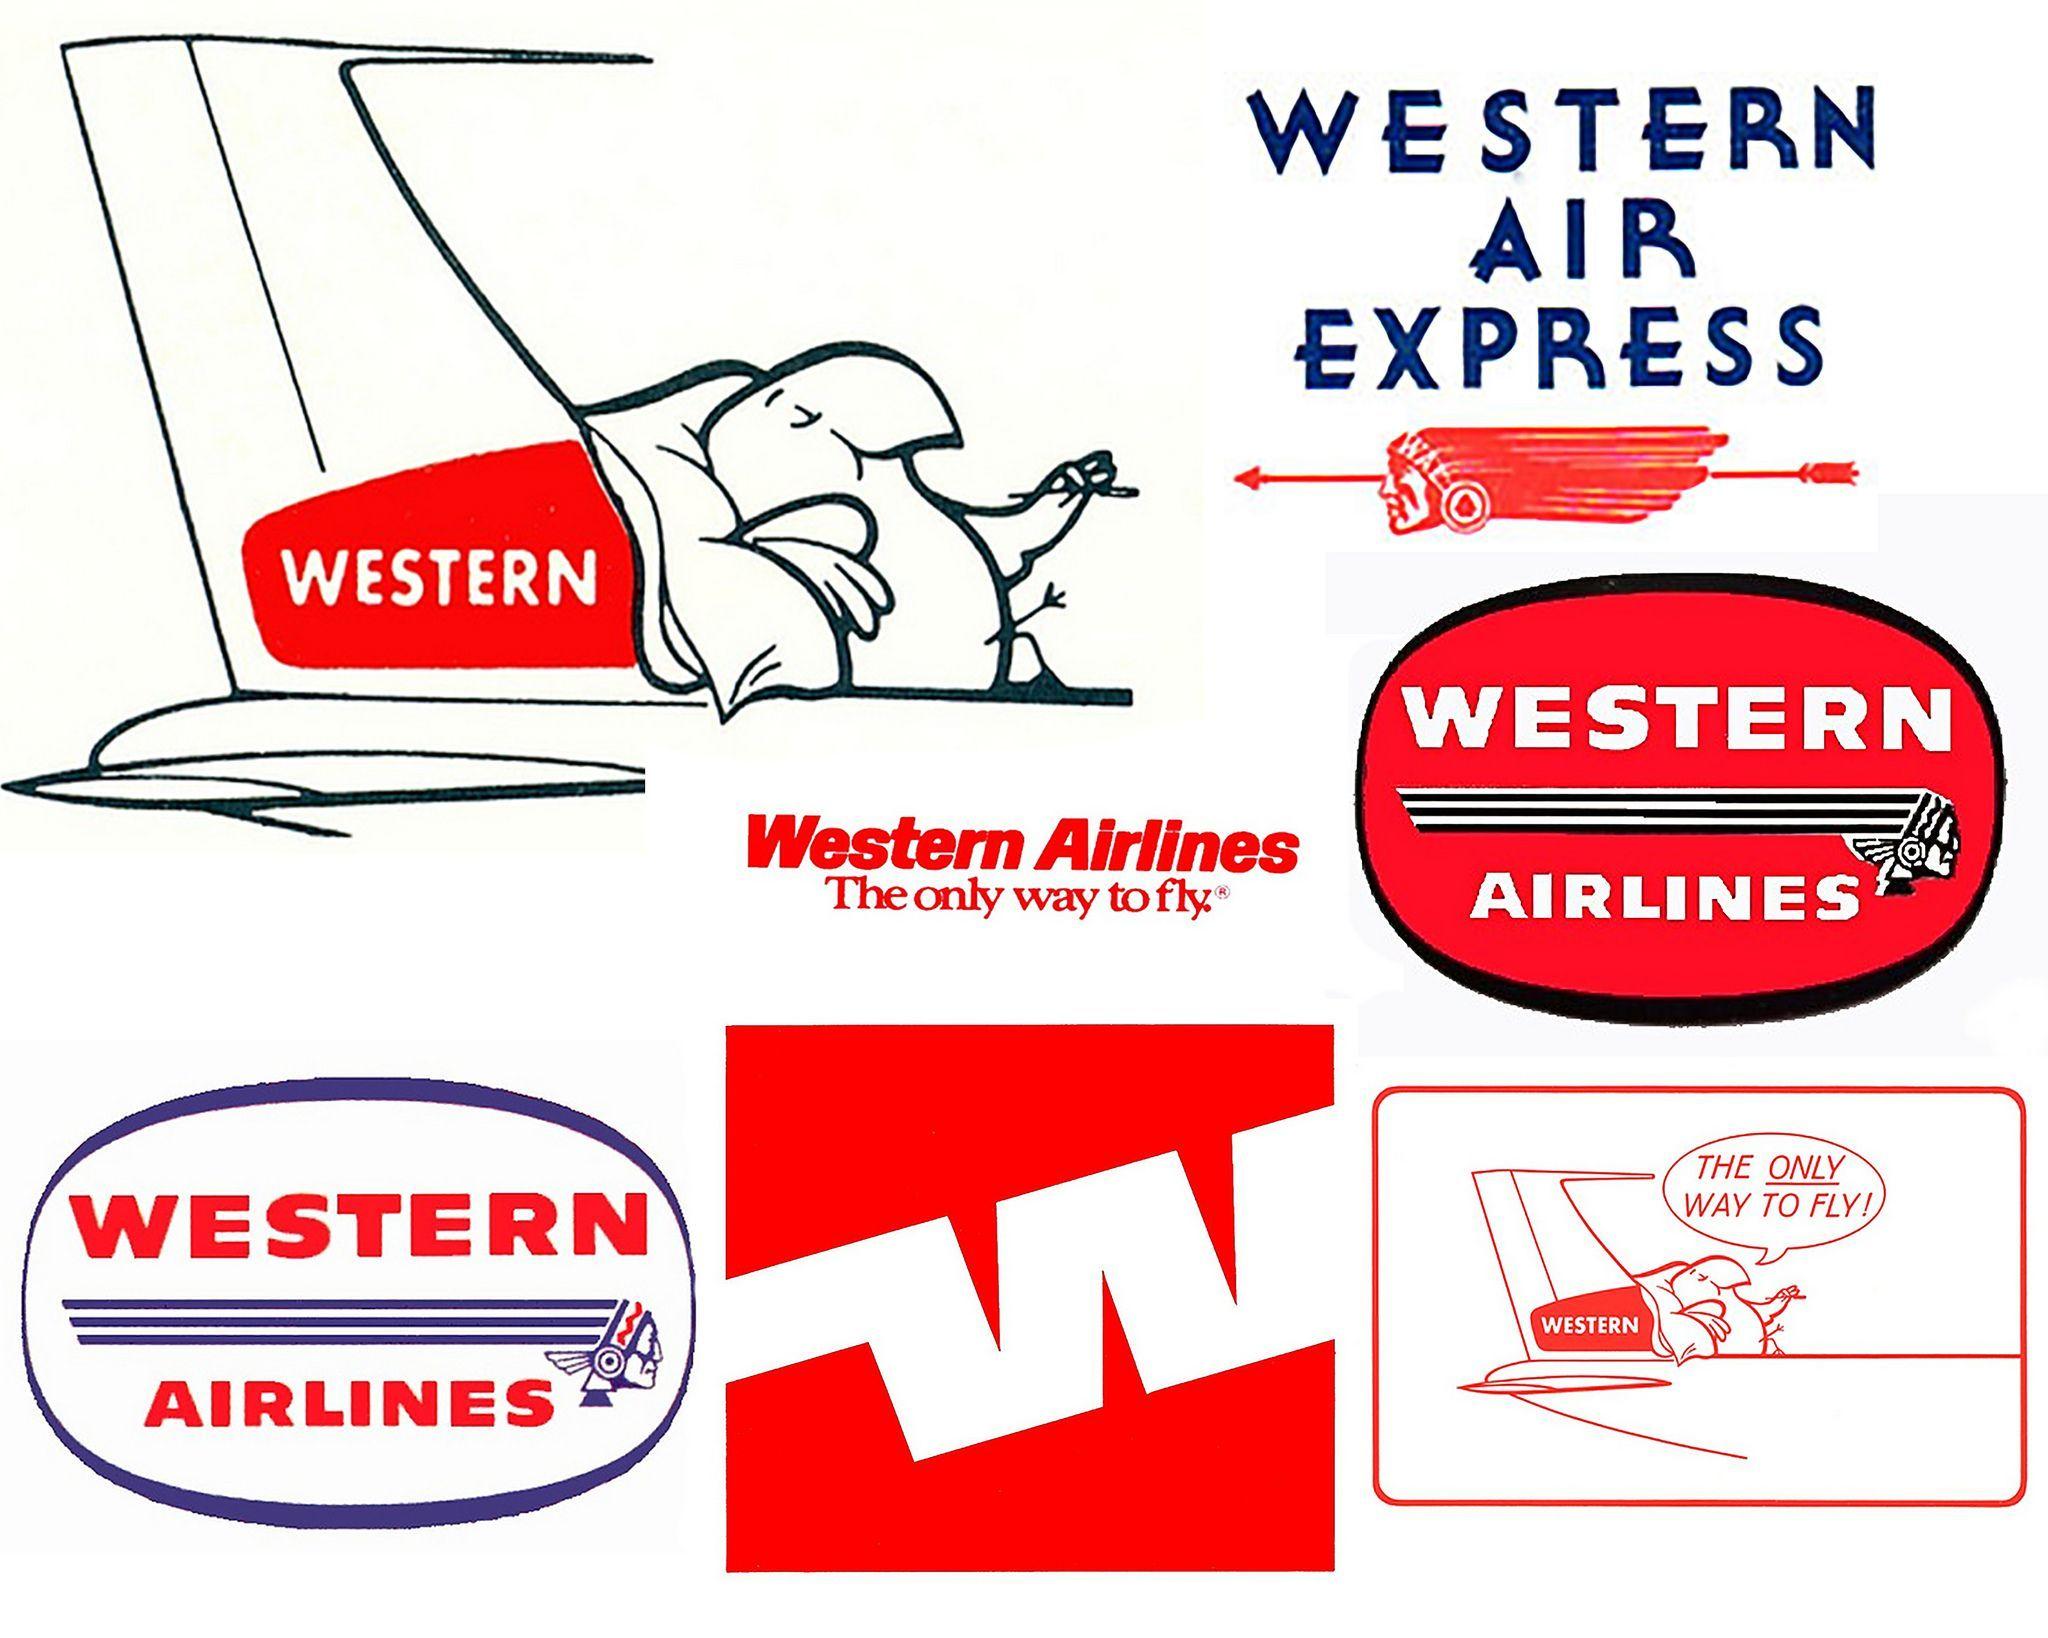 Major Airline Logo - Western Airlines Logos & VIB | Airlines and Airline Industry ...